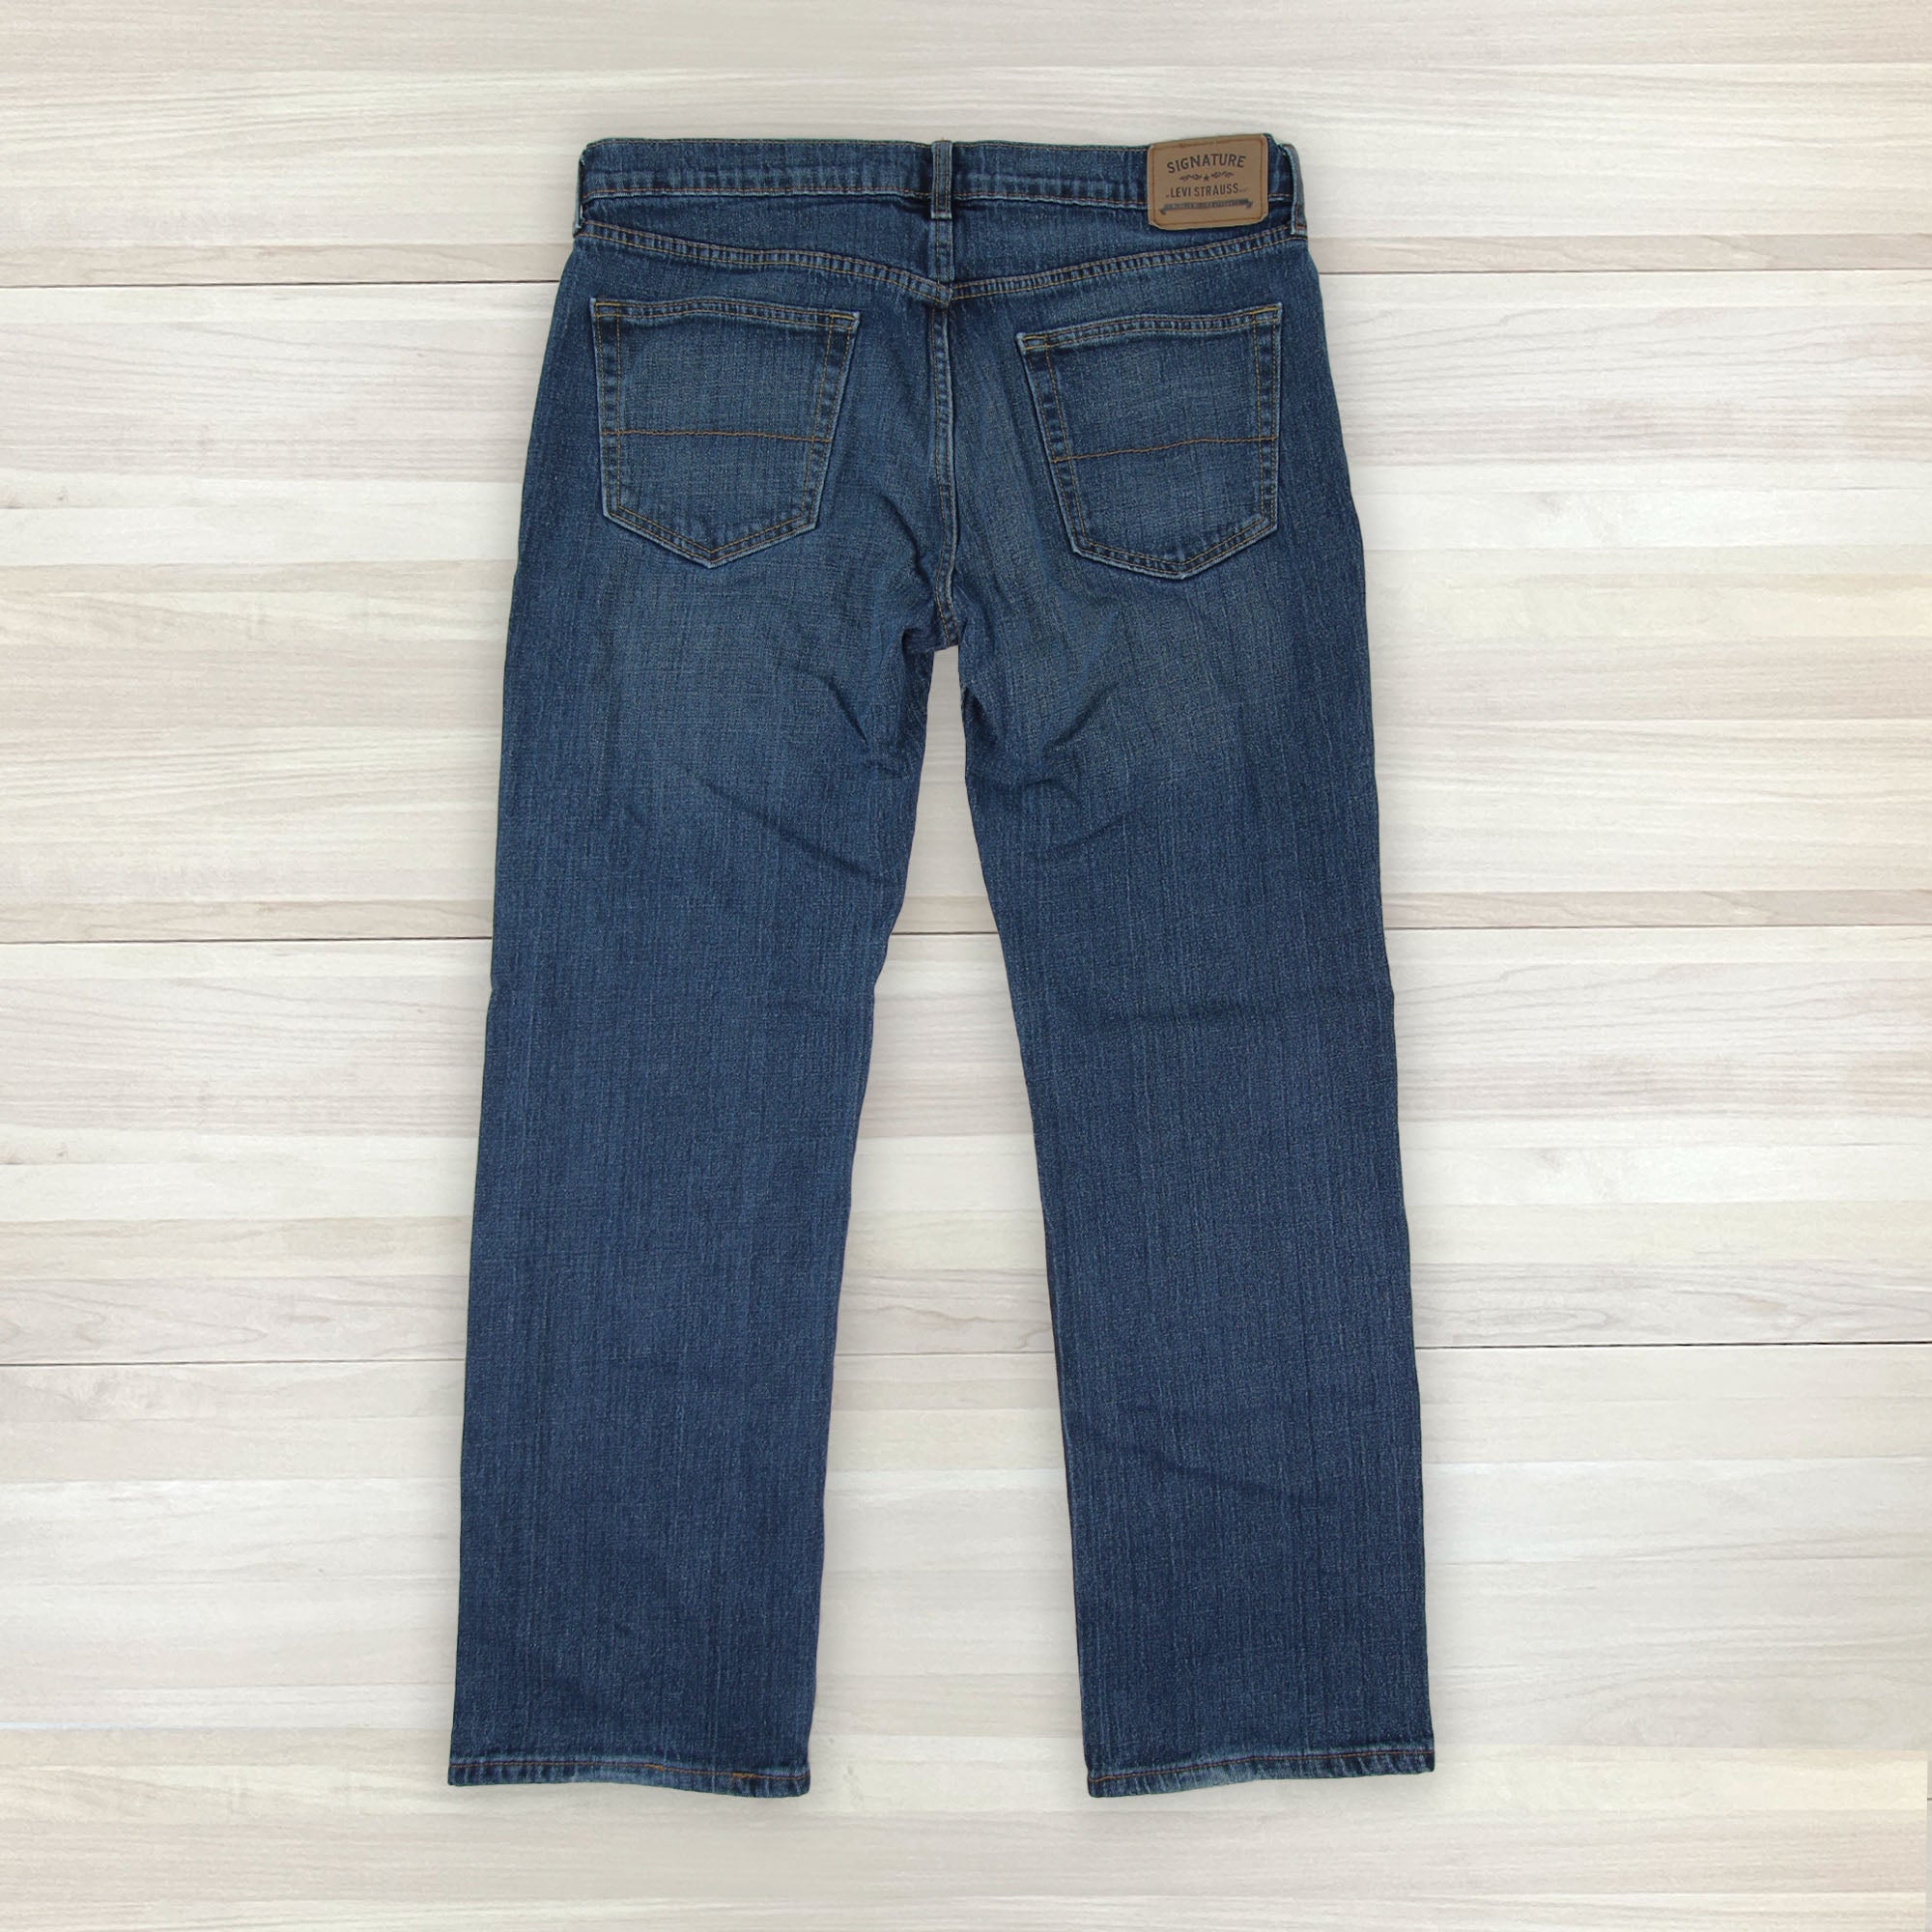 Men's Levi's Signature Relaxed Fit Jeans - 36x32 - 0